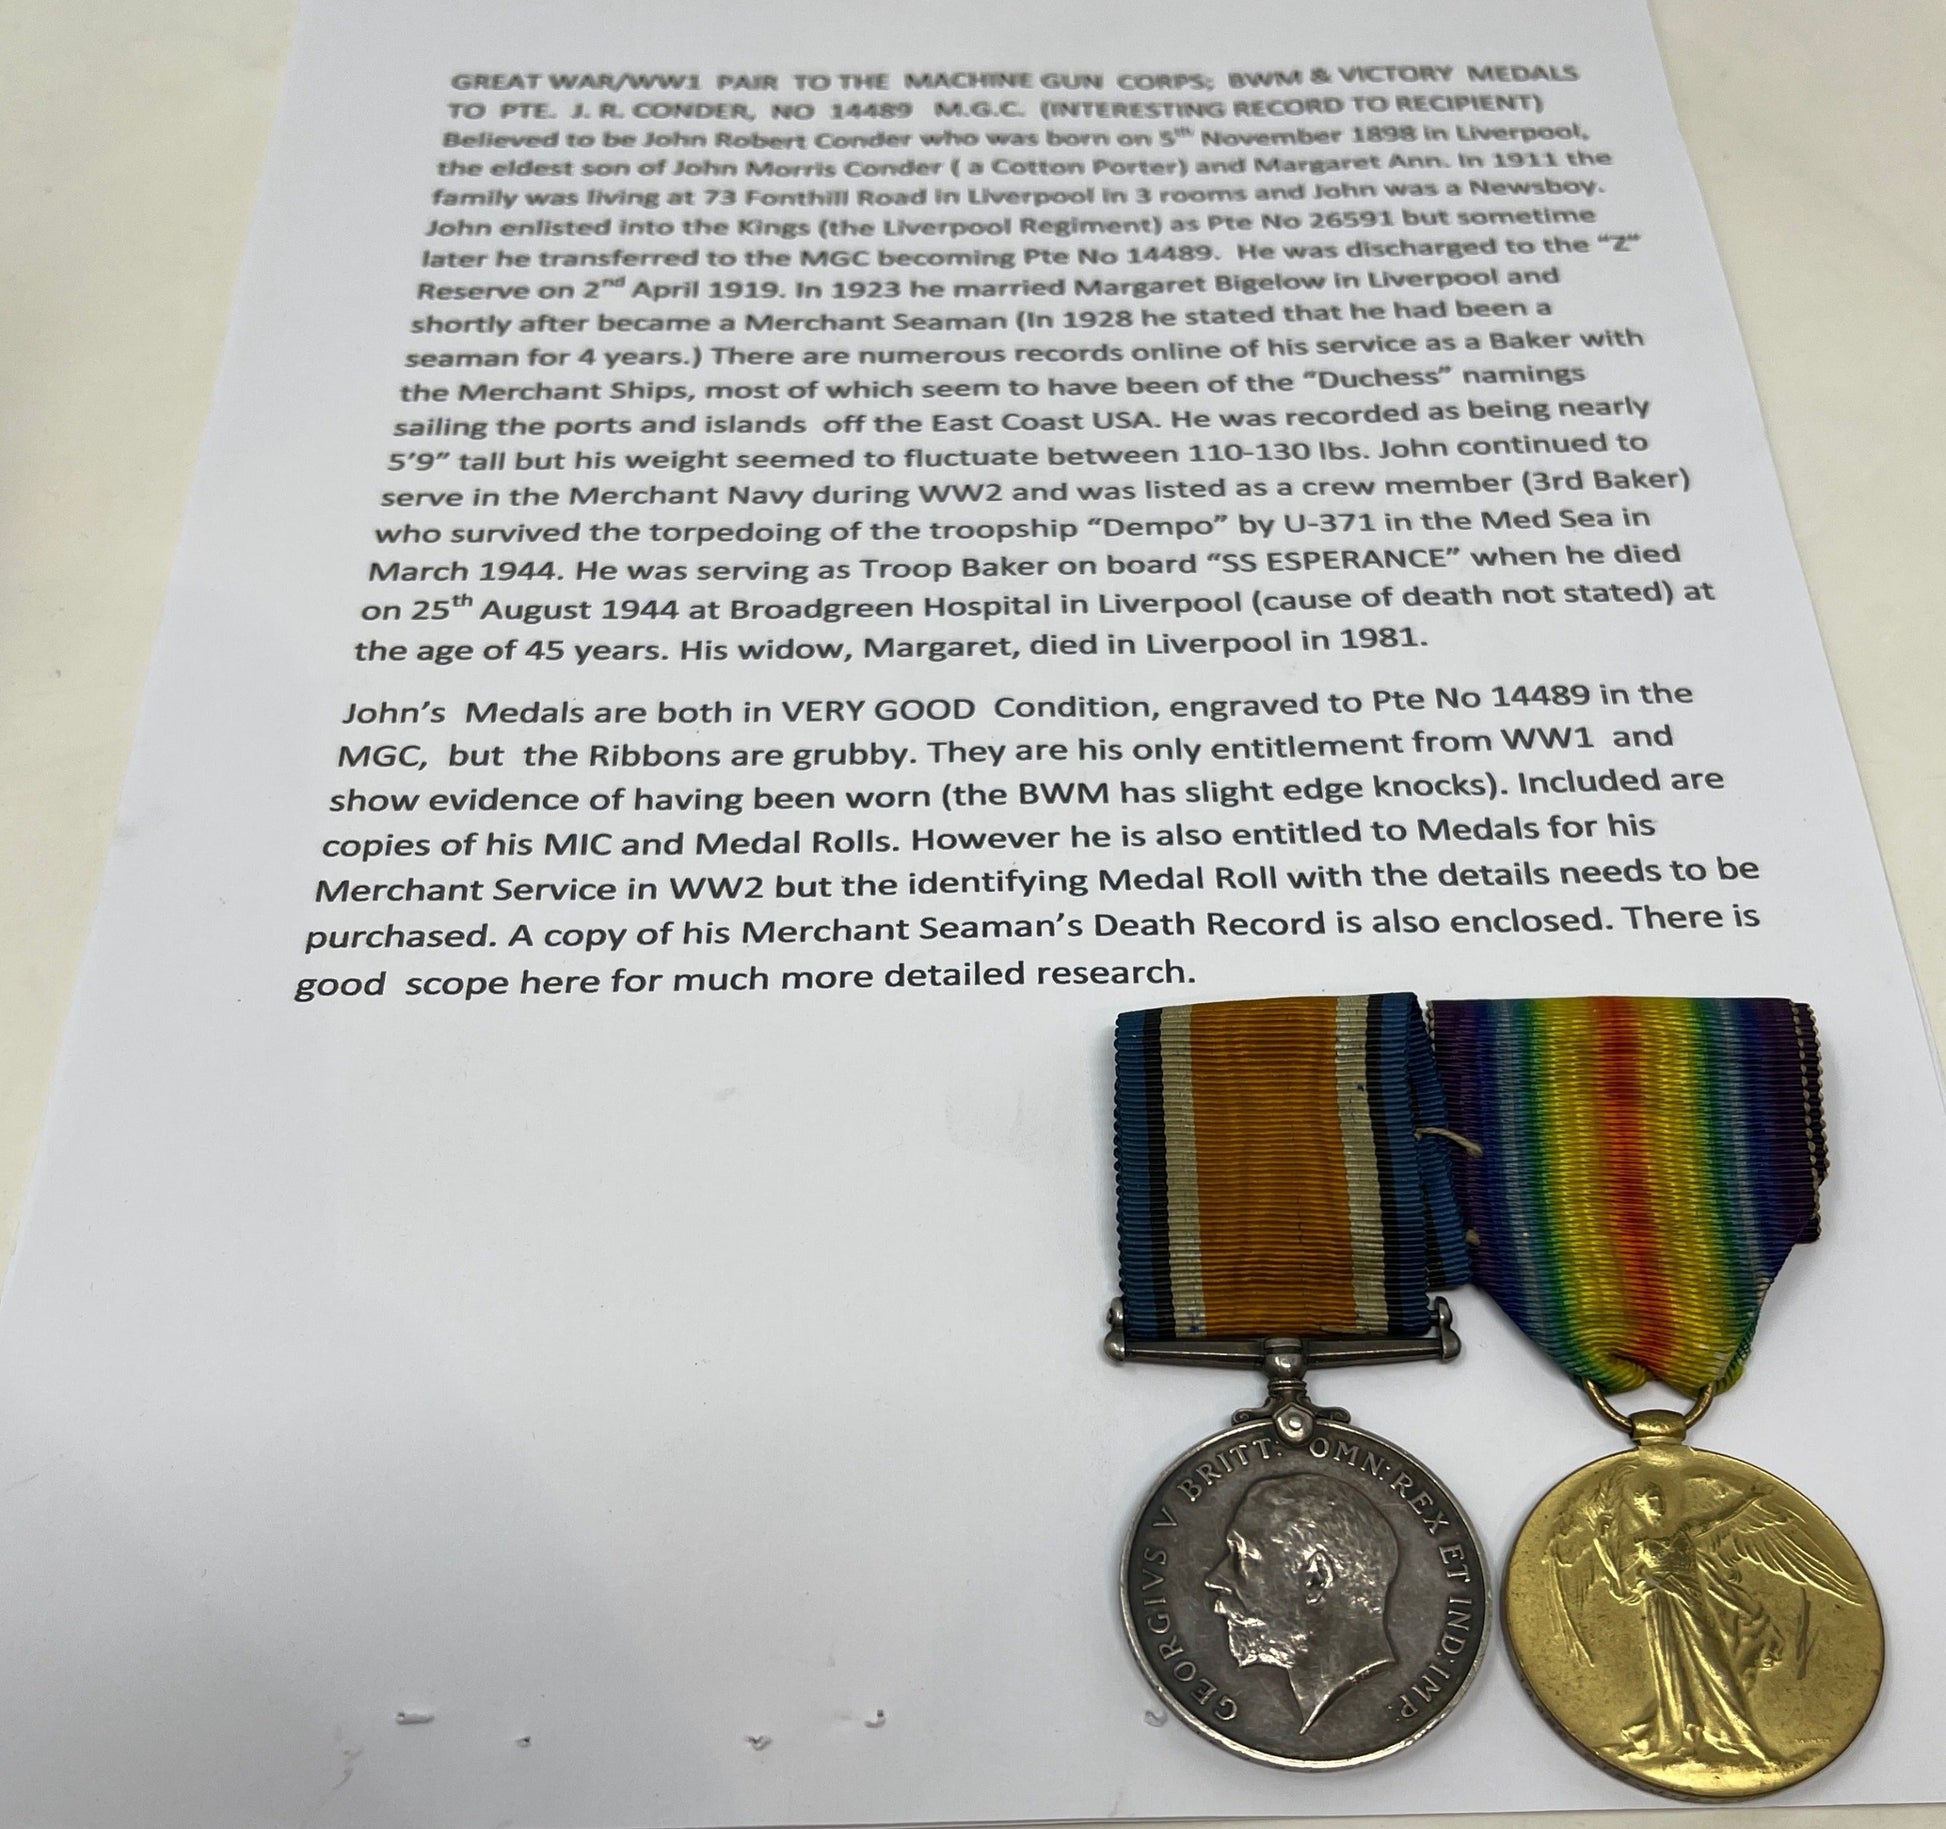 WW1 British Medal Pairs Fast & Secure UK Shipping | TJ's Militaria